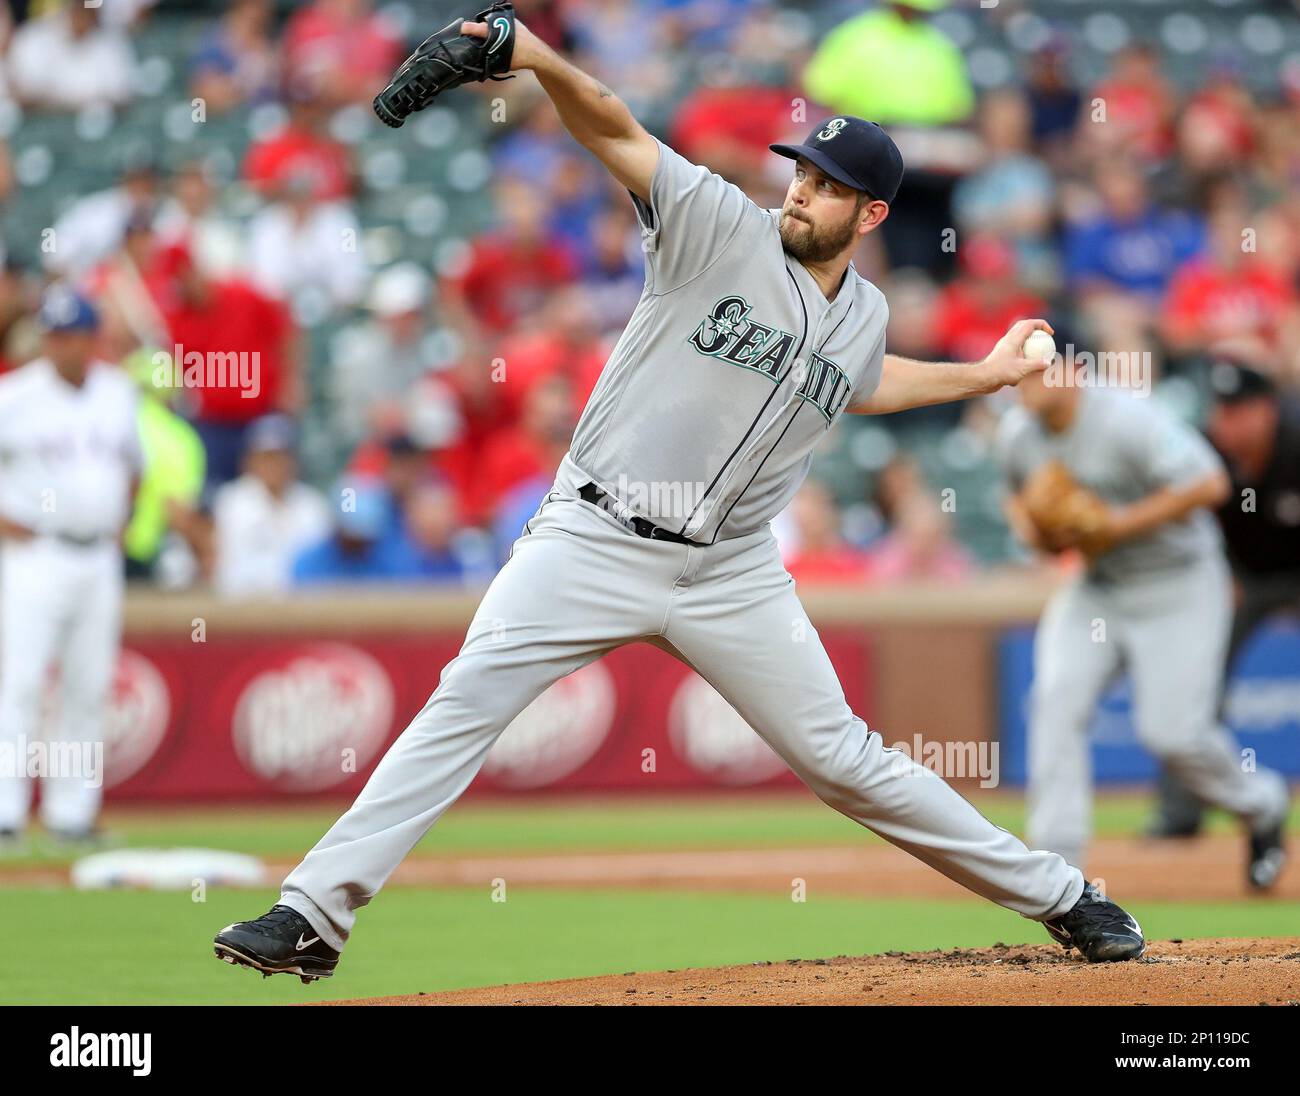 30 AUG 2016: Seattle Mariners starting pitcher James Paxton deliver a pitch  during the MLB game between the Seattle Mariners and the Texas Rangers at  Globe Life Park in Arlington, TX. (Photo